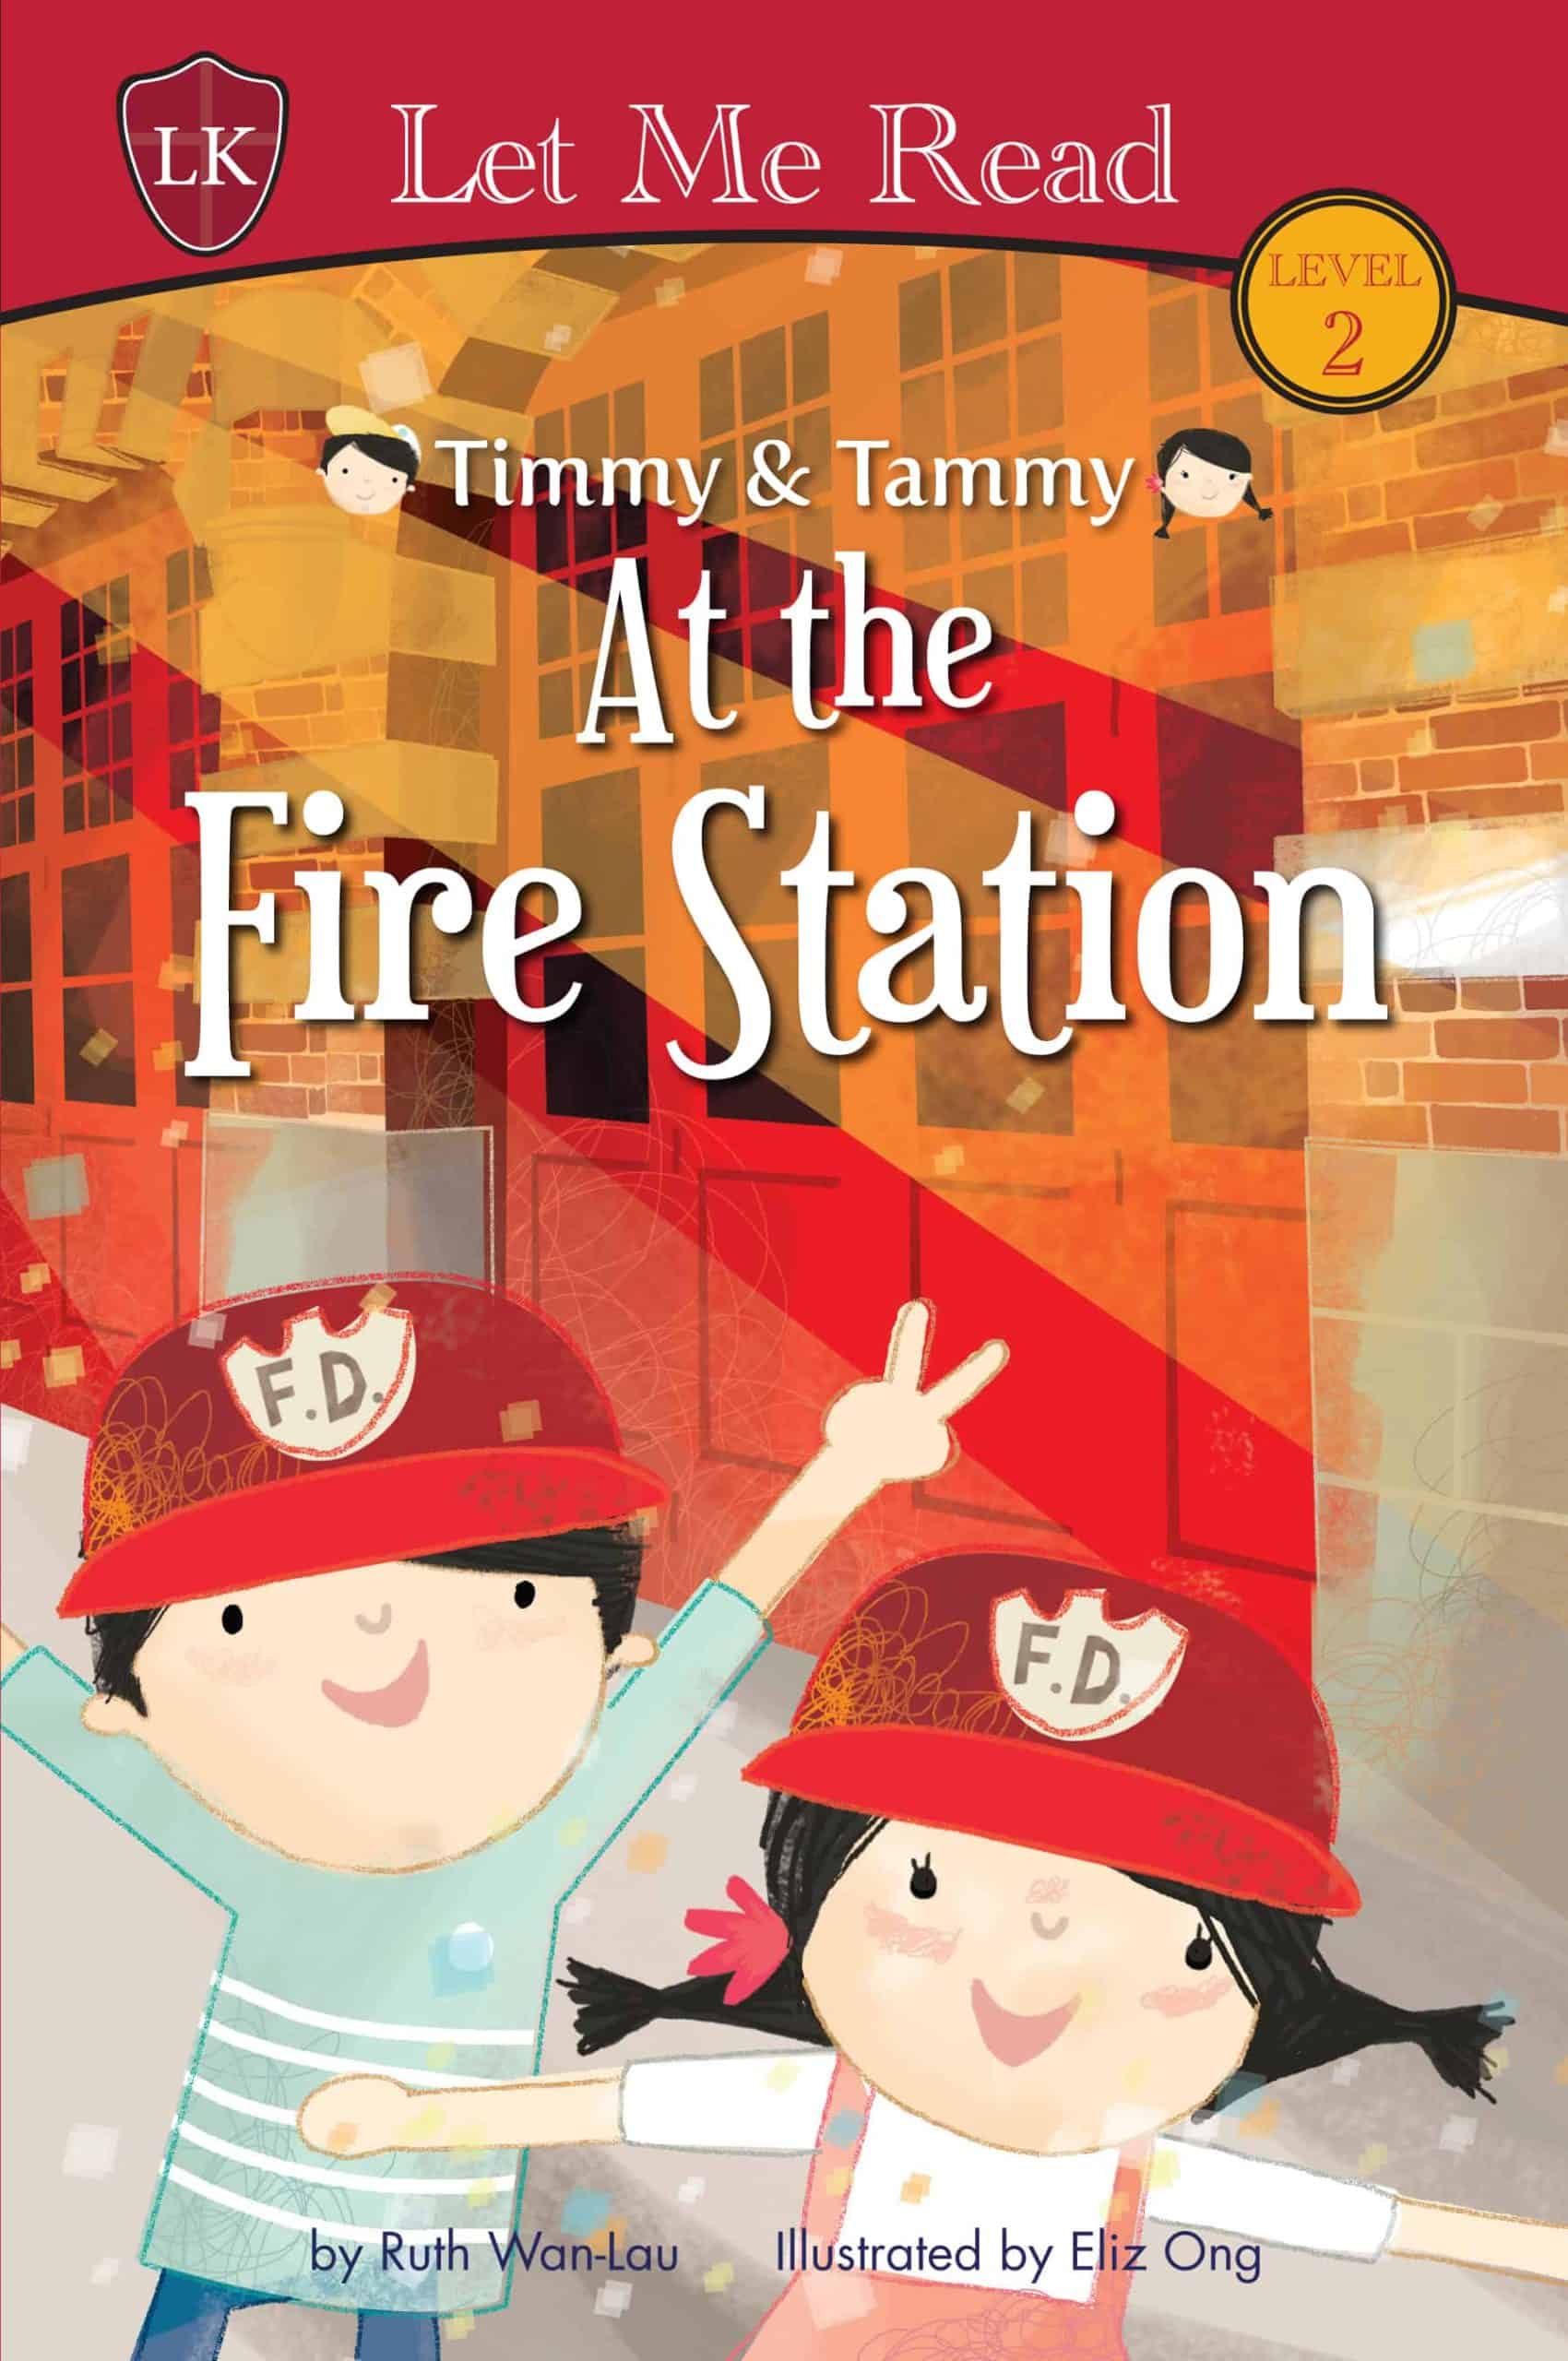 Timmy & Tammy (Level 2): At the Fire Station